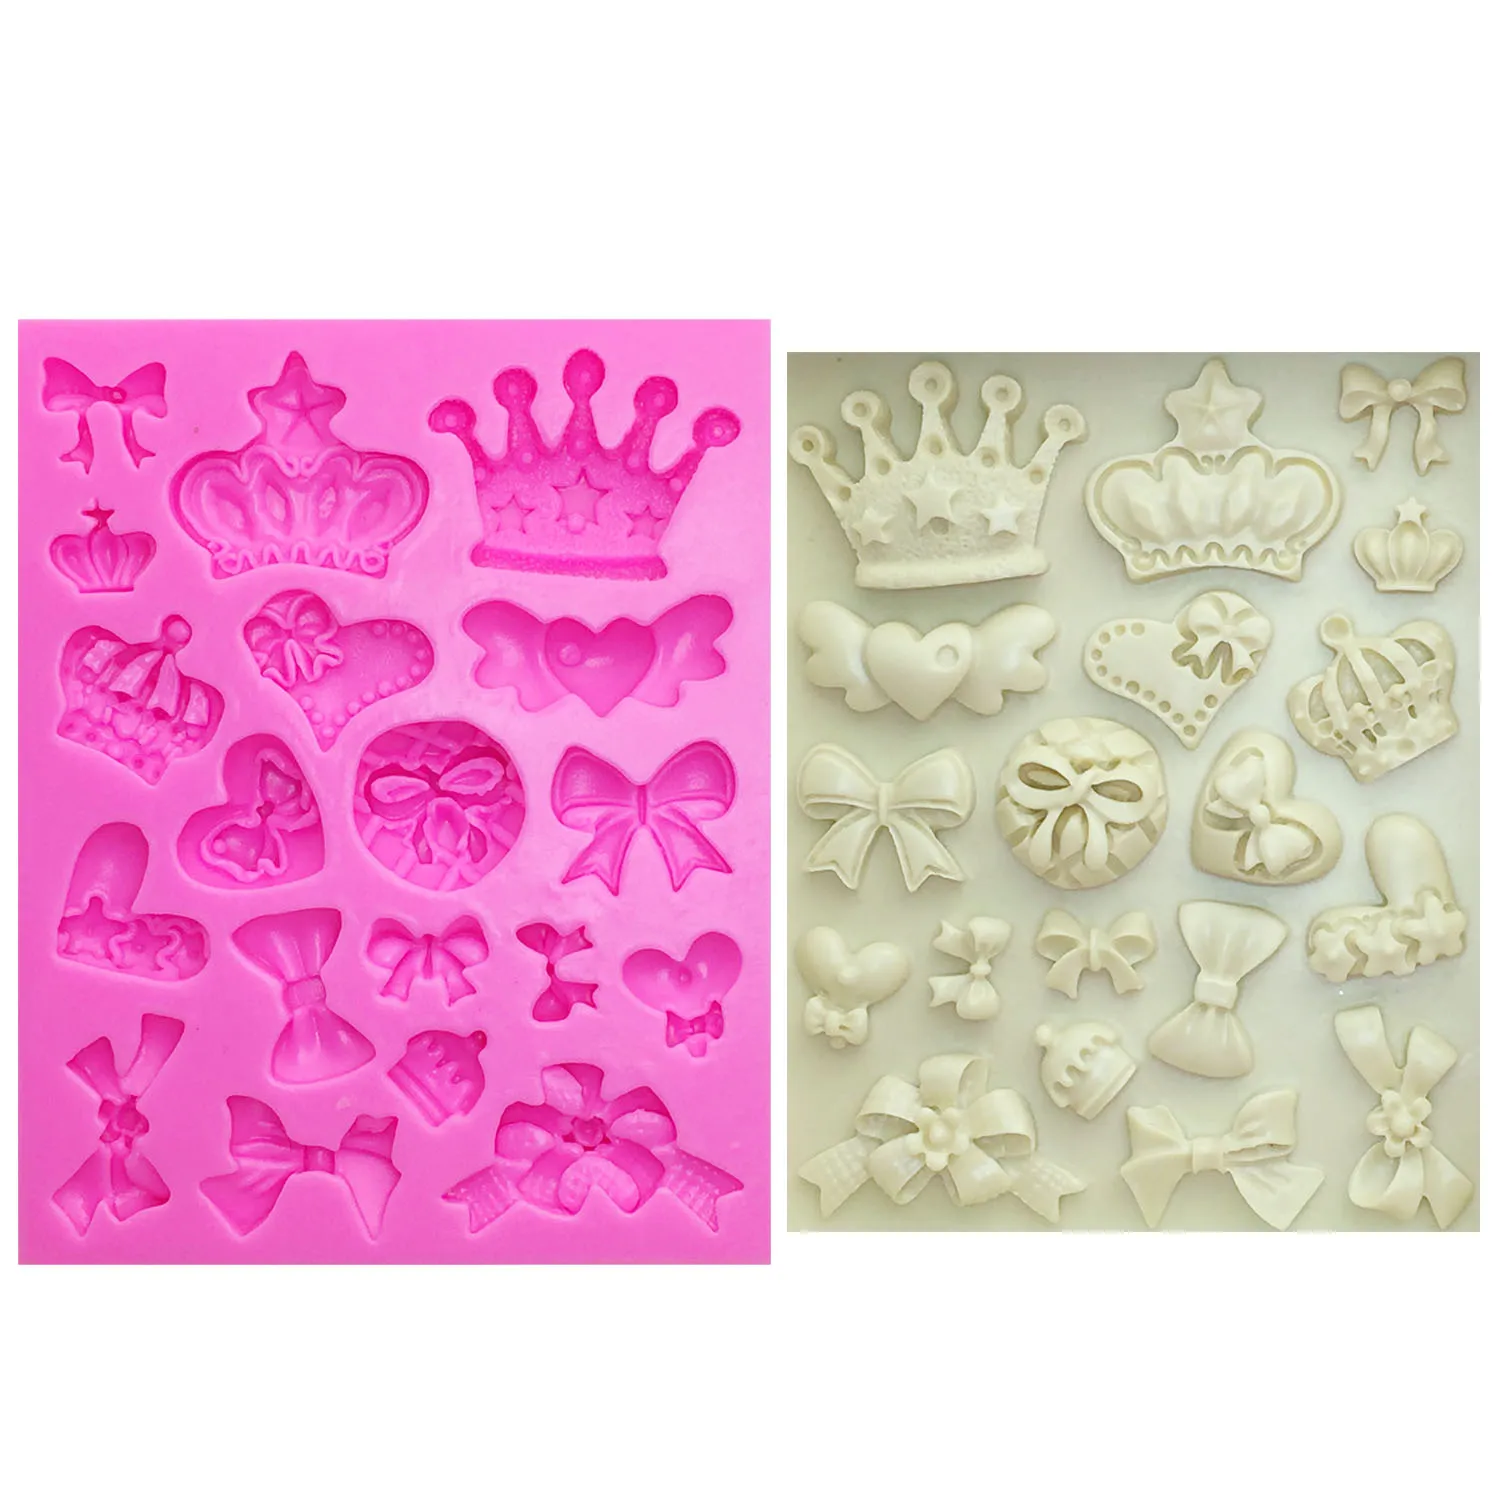 

M0226 Cartoon Crown & Bow Tie Silicone Fondant Cake Mold Cupcake Jelly Candy Chocolate cake Decoration Baking Tool Moulds